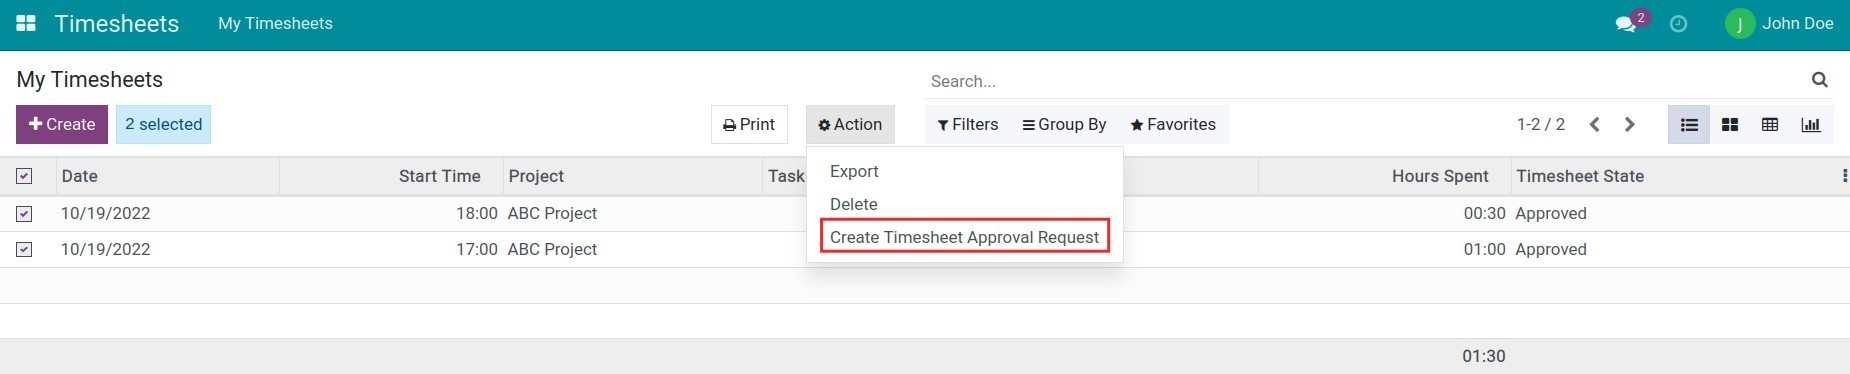 Create Timesheet Approval request